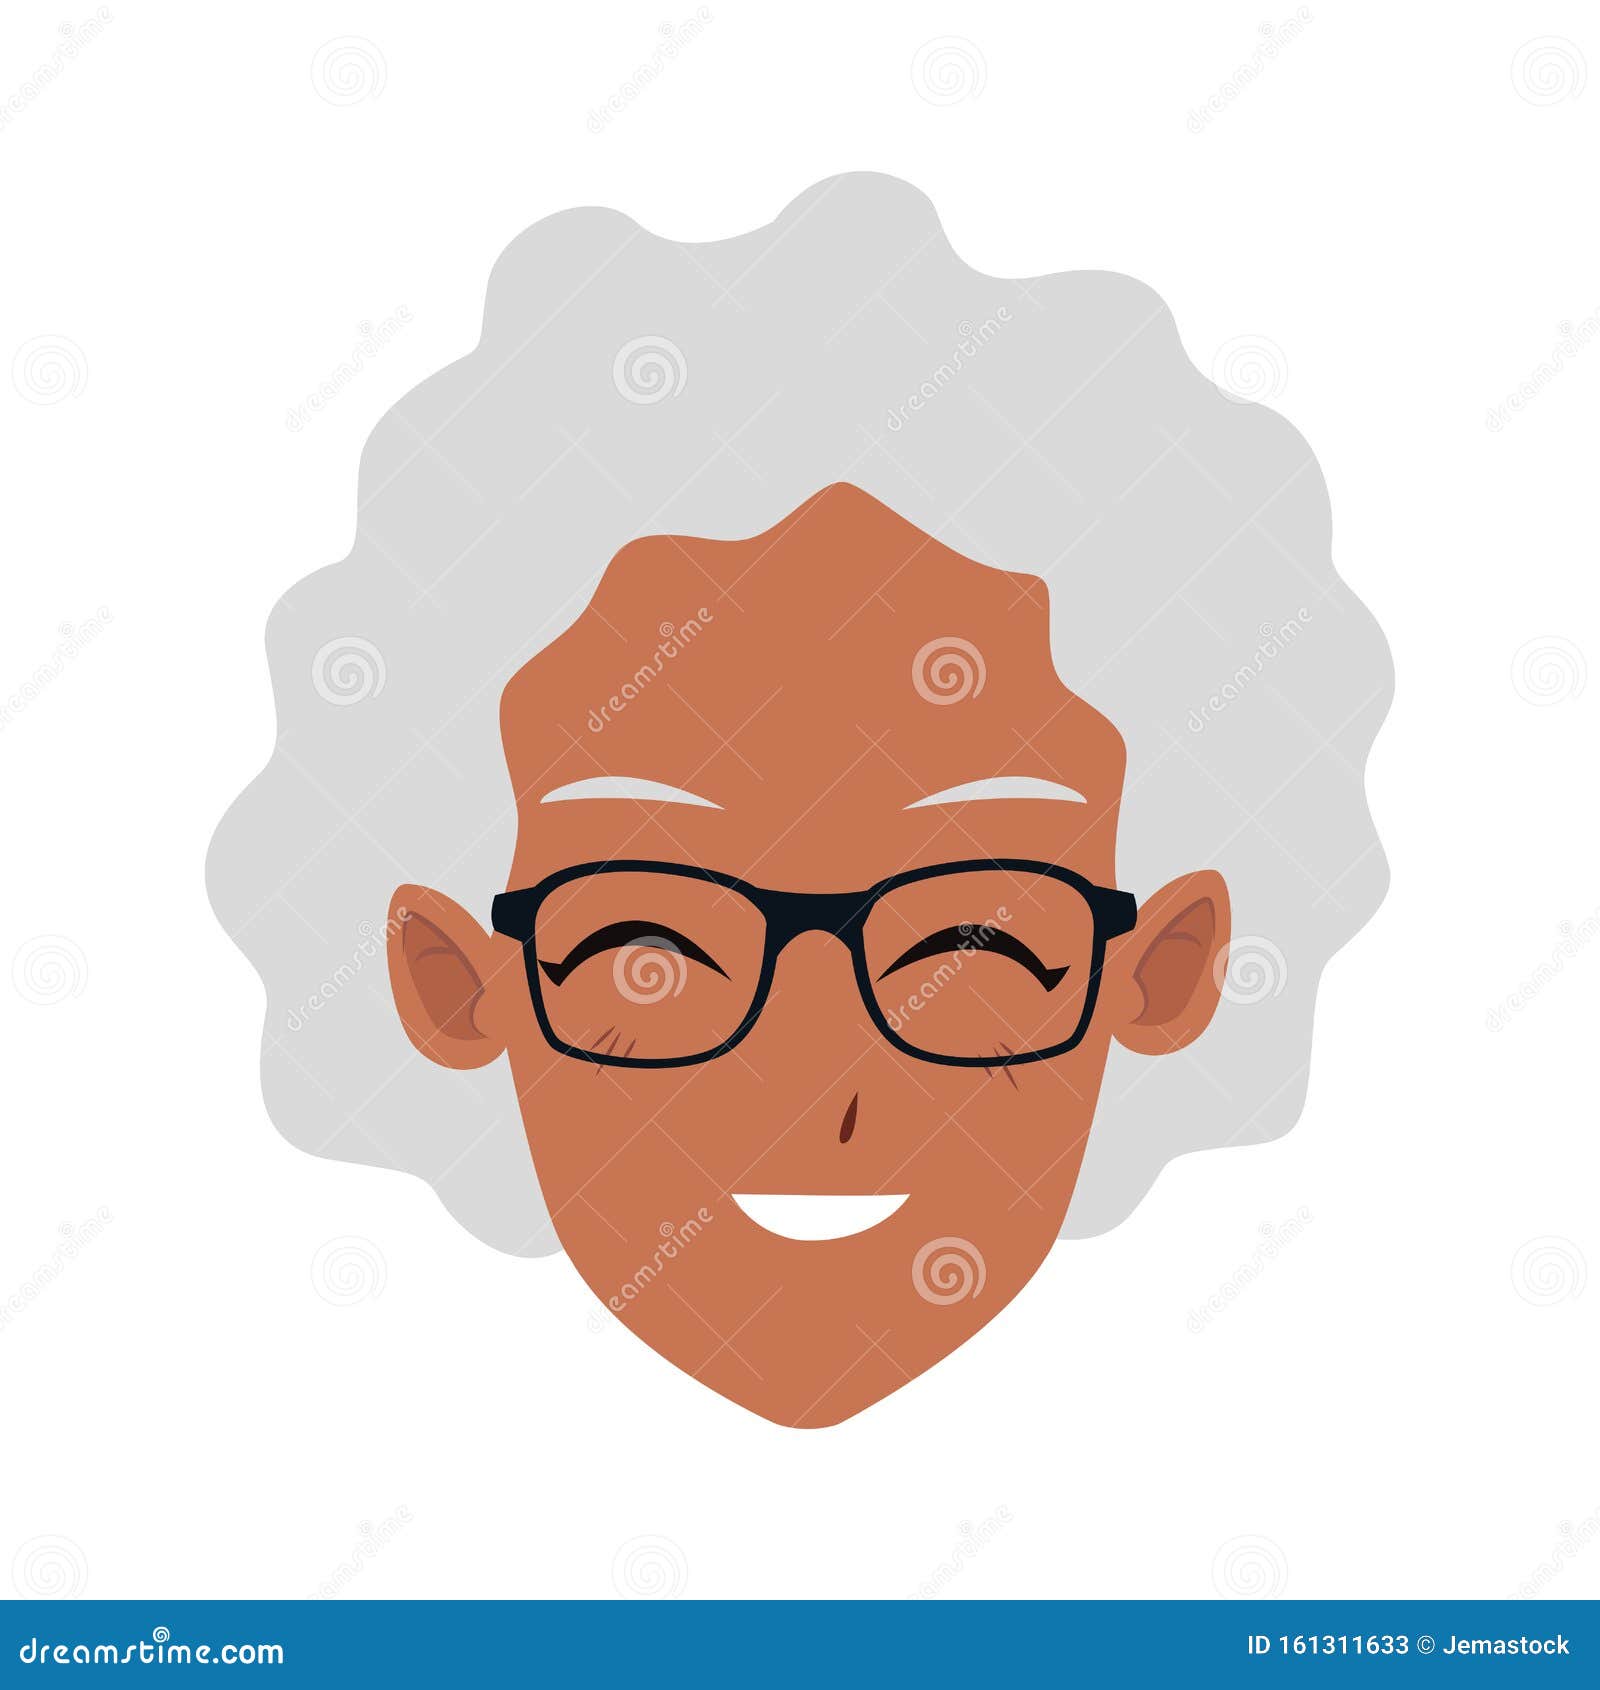 Cartoon Old Woman With Glasses Flat Design Stock Vector Illustration